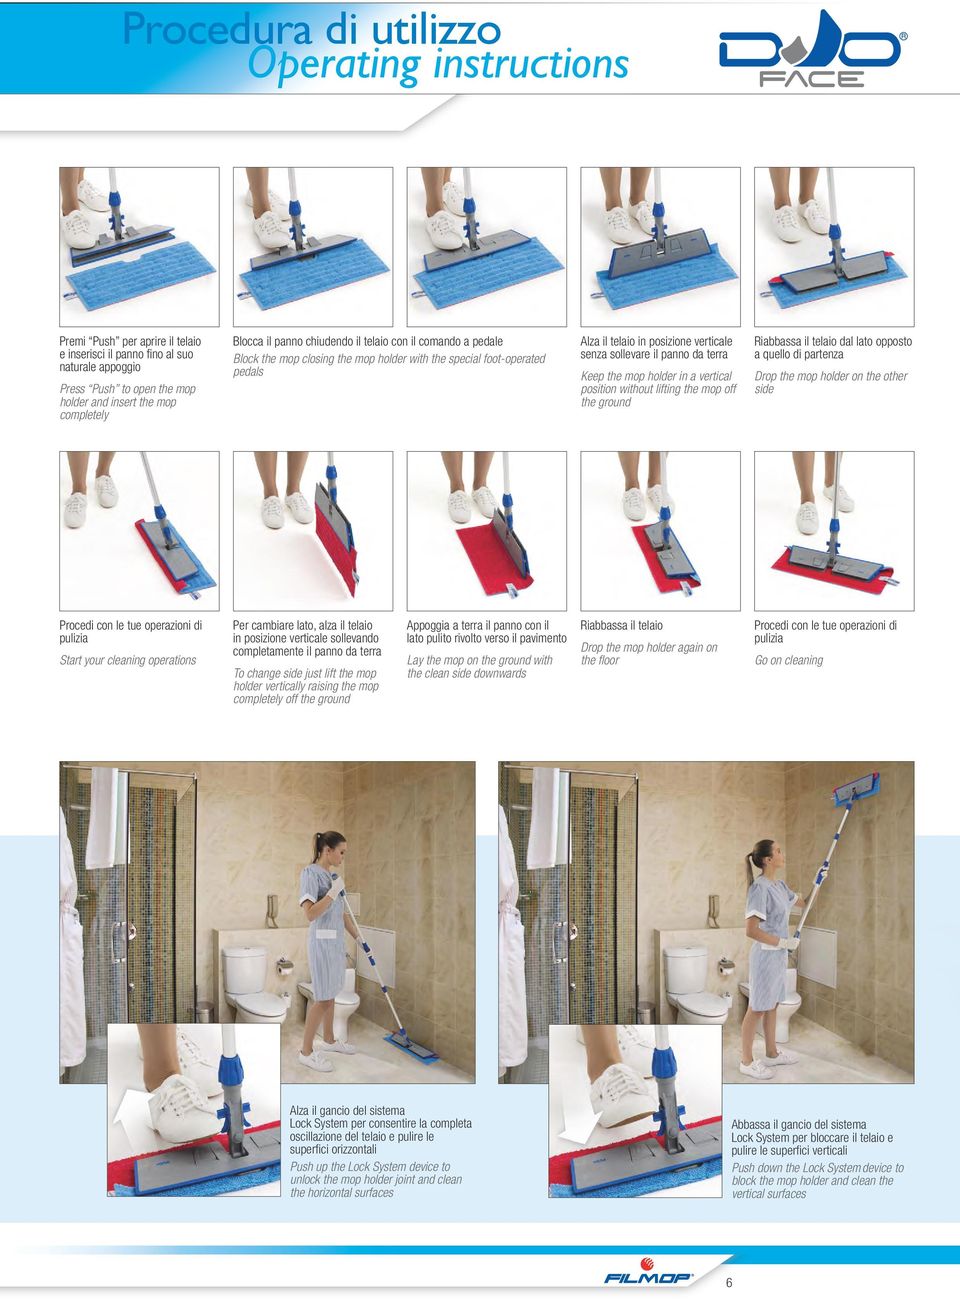 Keep the mop holder in a vertical position without lifting the mop off the ground Riabbassa il telaio dal lato opposto a quello di partenza Drop the mop holder on the other side Procedi con le tue